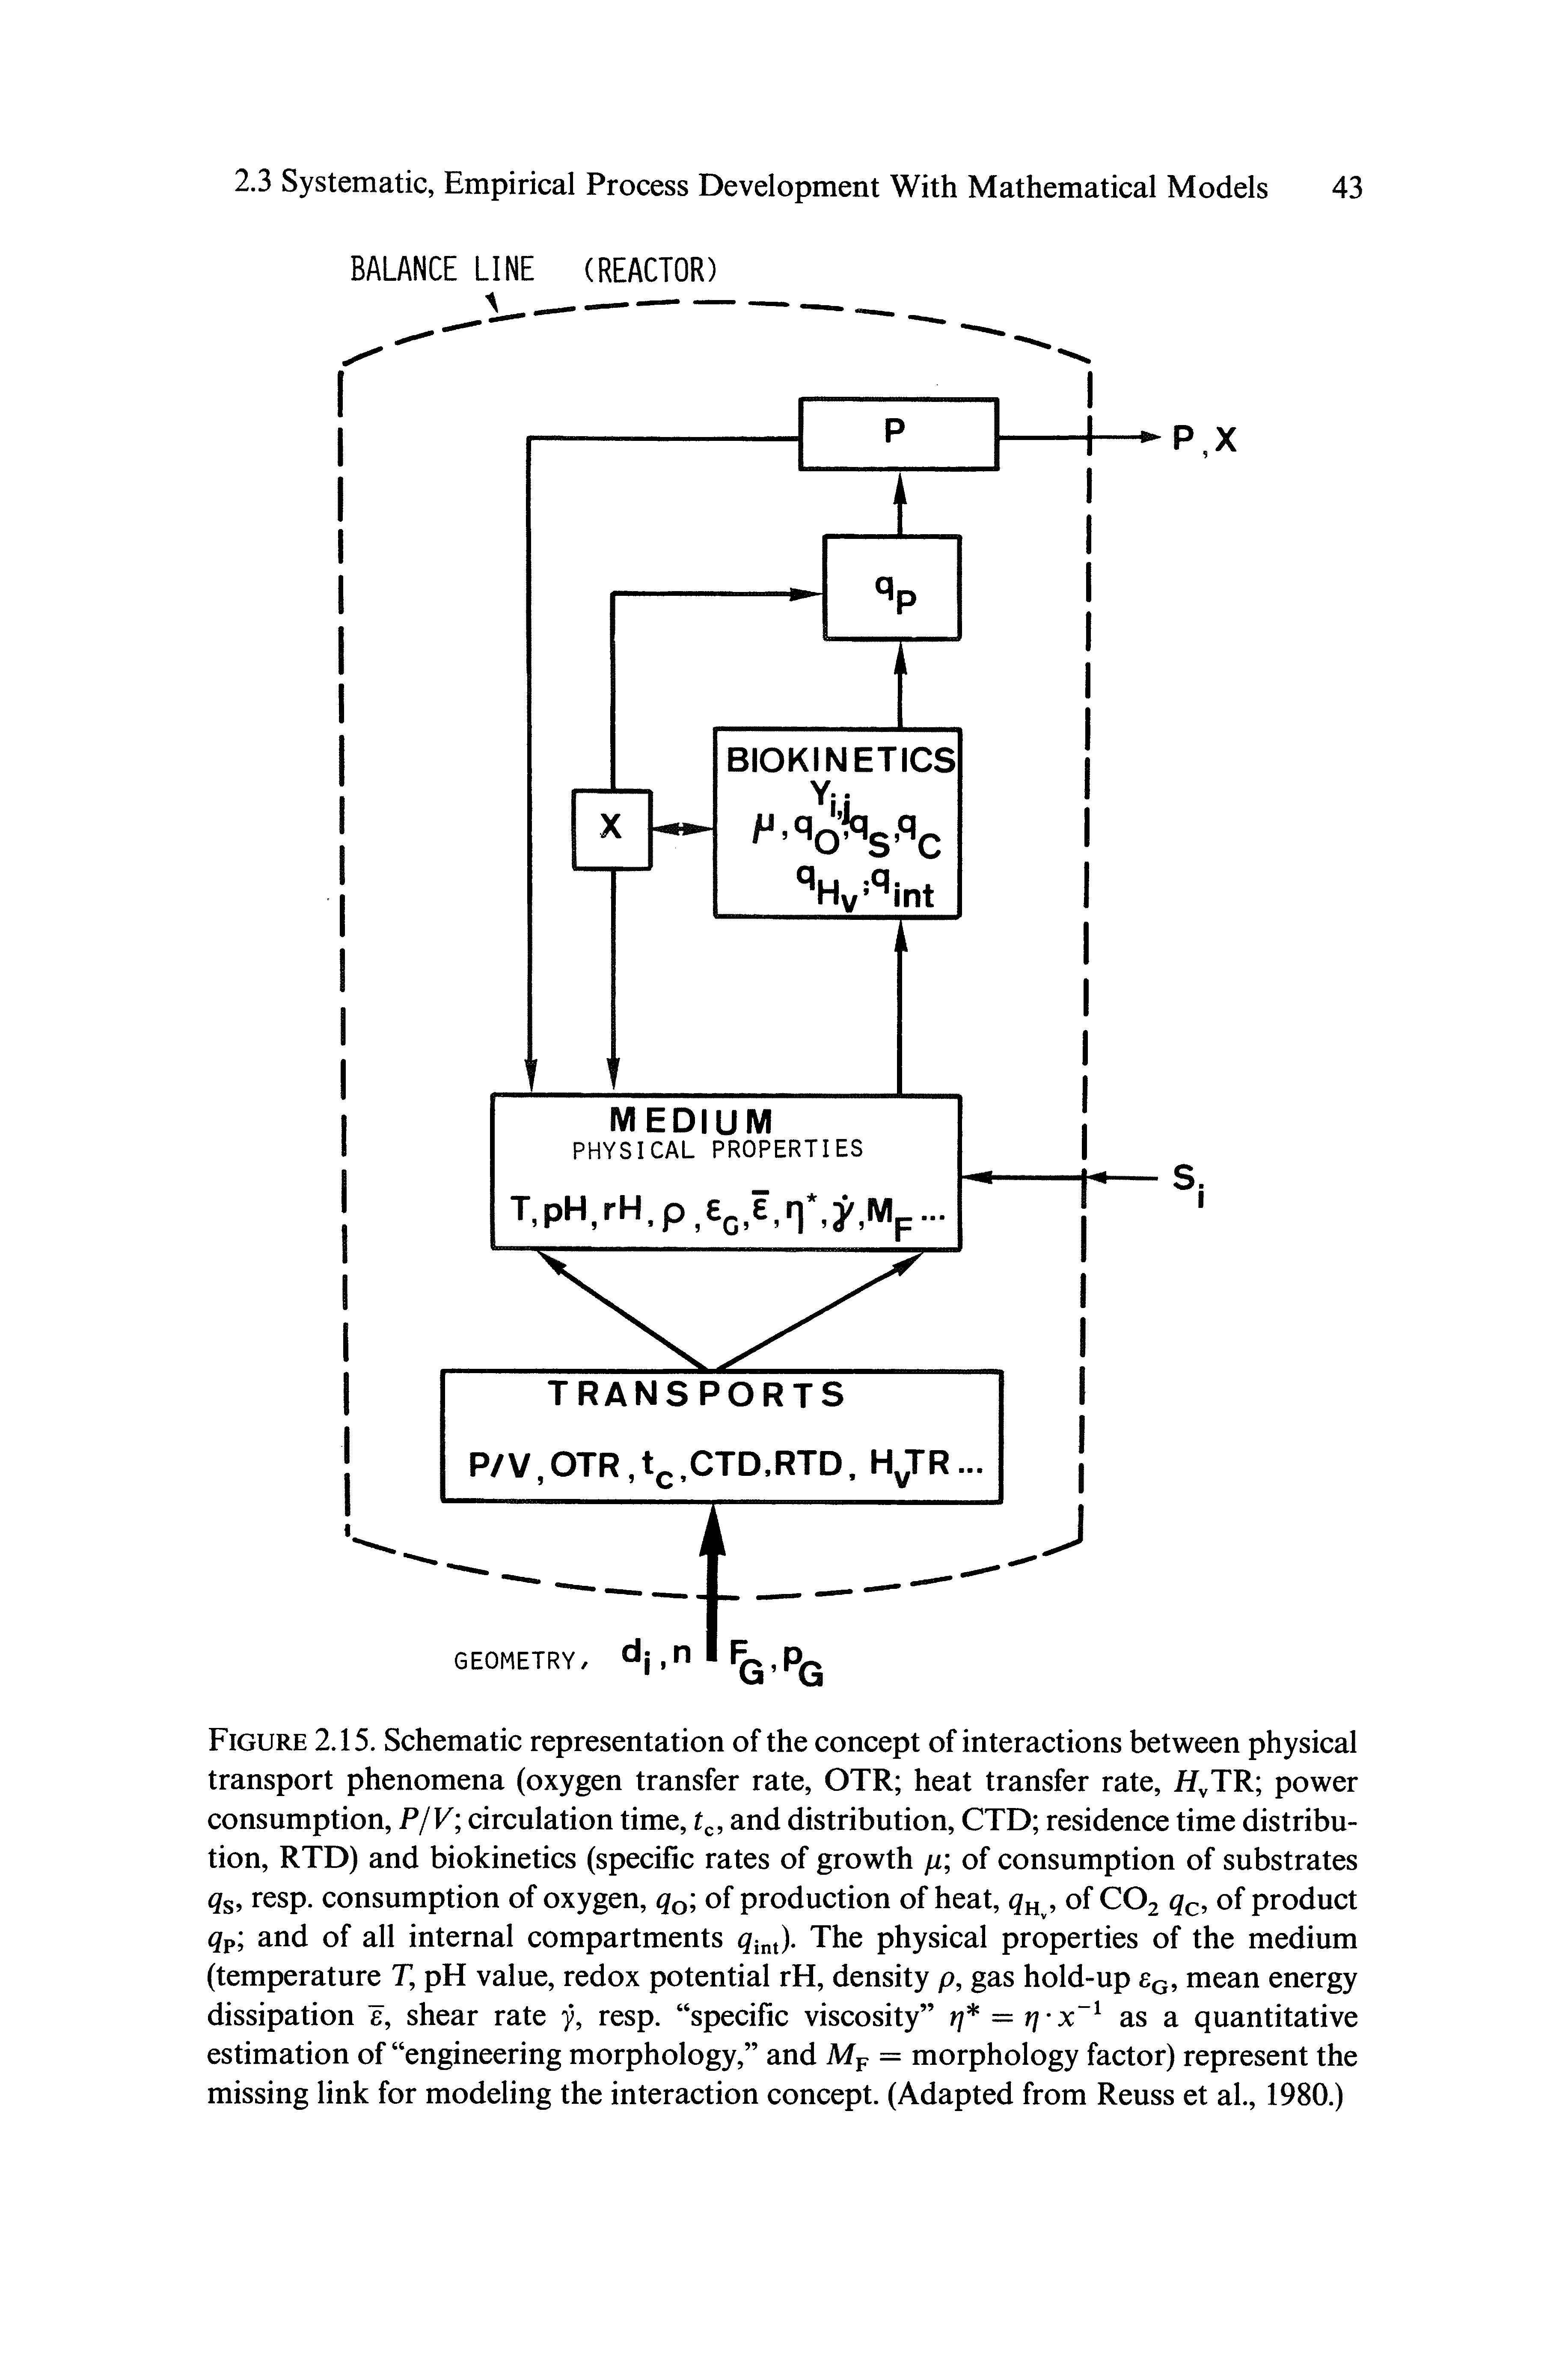 Figure 2.15. Schematic representation of the concept of interactions between physical transport phenomena (oxygen transfer rate, OTR heat transfer rate, H TR power consumption, P/V circulation time, and distribution, CTD residence time distribution, RTD) and biokinetics (specific rates of growth fi of consumption of substrates q, resp. consumption of oxygen, of production of heat,, of CO2 qc, of product qp and of all internal compartments (jinJ. The physical properties of the medium (temperature T, pH value, redox potential rH, density p, gas hold-up Eq, mean energy dissipation e, shear rate 7, resp. specific viscosity q — as a quantitative...